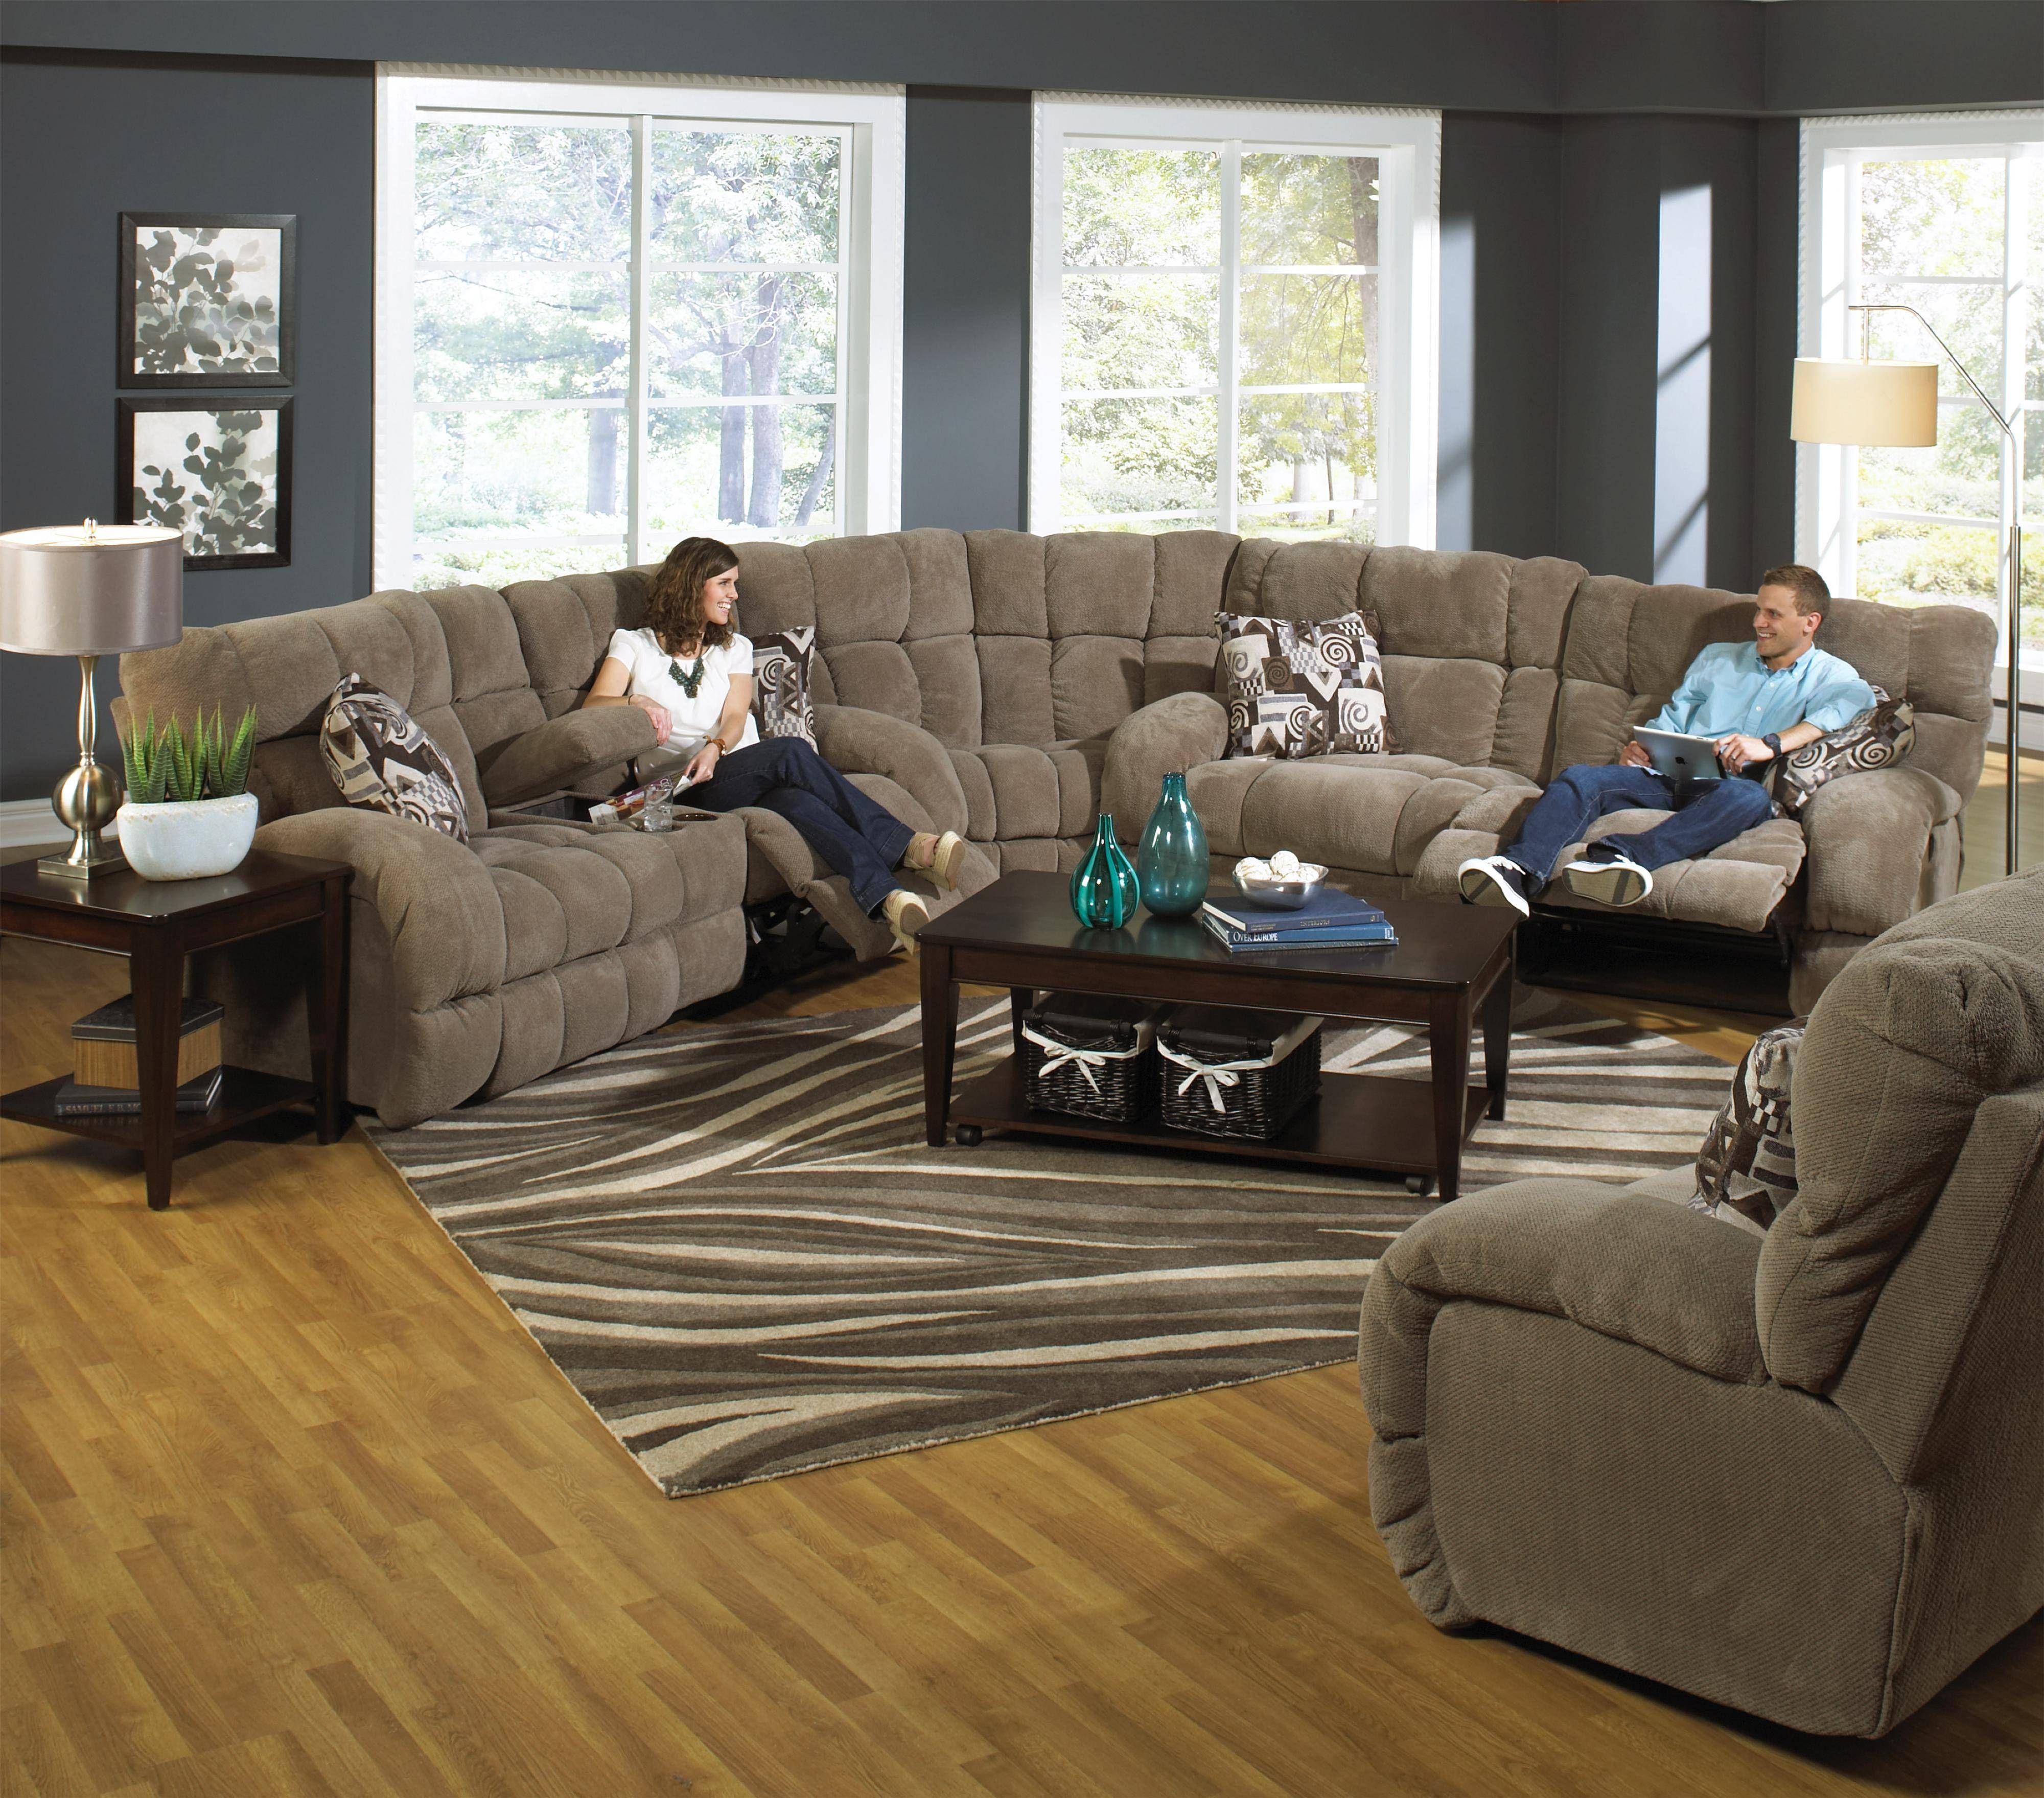 Furniture: Lazy Boy Sectional | Sectional Couches With Recliners Inside Sectional Sofas With Electric Recliners (View 23 of 30)